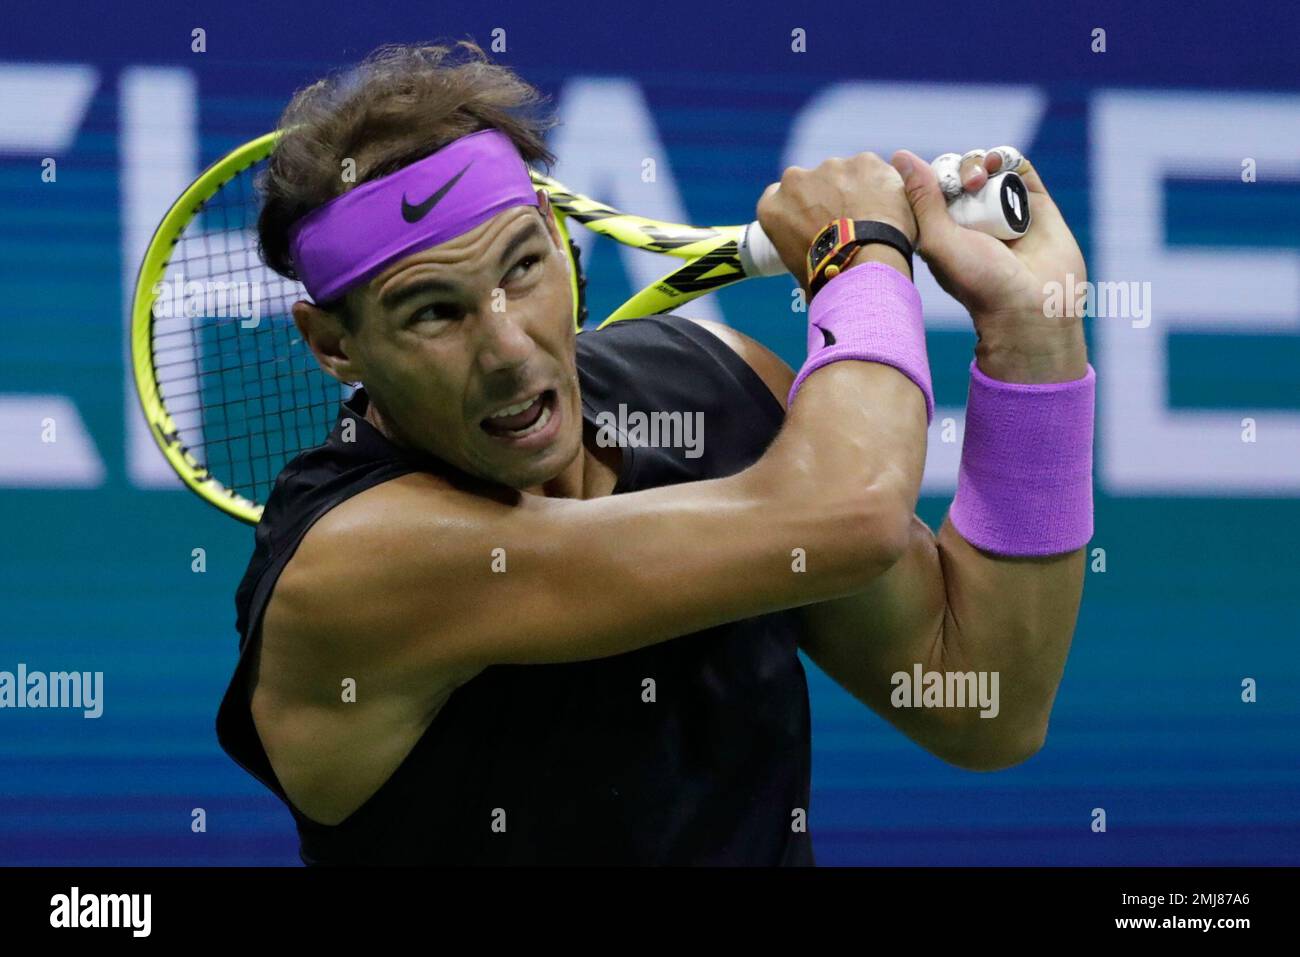 Rafael Nadal, of Spain, returns a shot to Matteo Berrettini, of Italy, during the mens singles semifinals of the U.S. Open tennis championships Friday, Sept